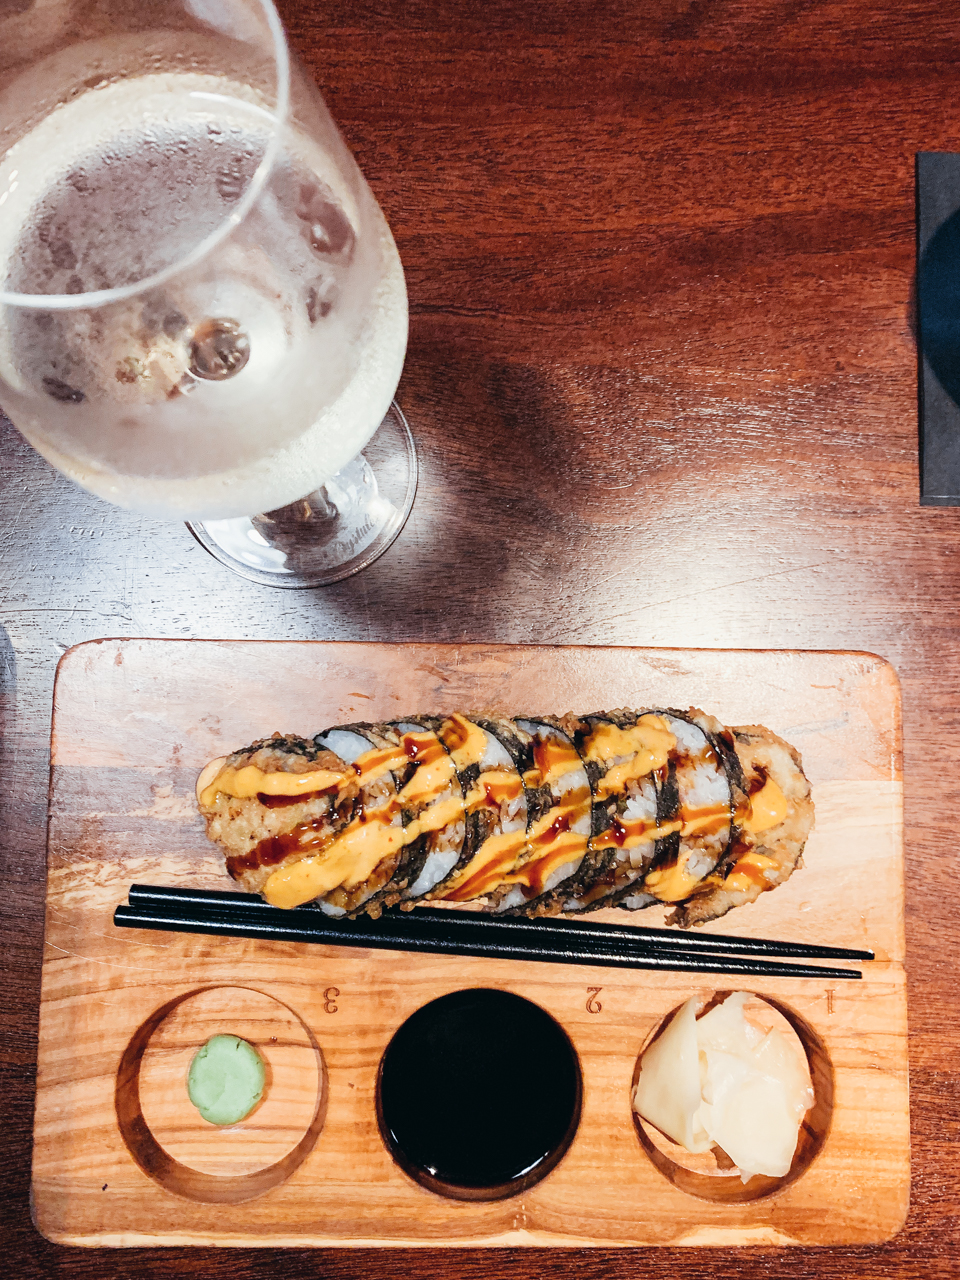 Bettini's | New England Foodie Guide: Top 8 Restaurants in Martha's Vineyard You Must Try by popular New England Food Blogger, Shannon Shipman: image of sushi at Bettini's in Martha's Vineyard.